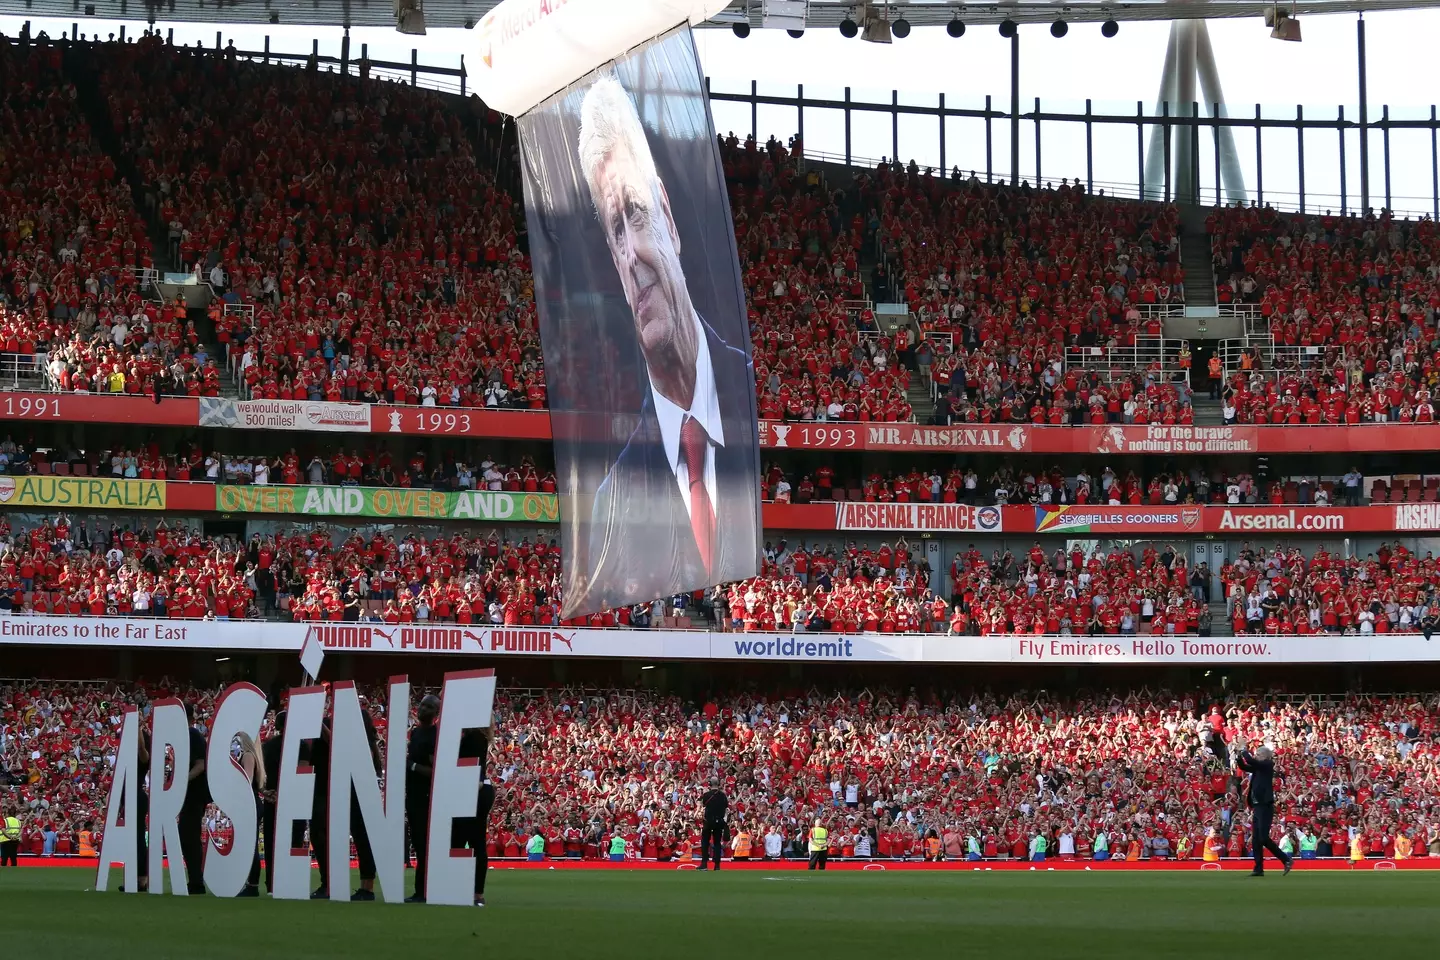 Arsene Wenger's relationship with fans soured towards the end of his tenure, but he remains an Arsenal legend (Alamy)